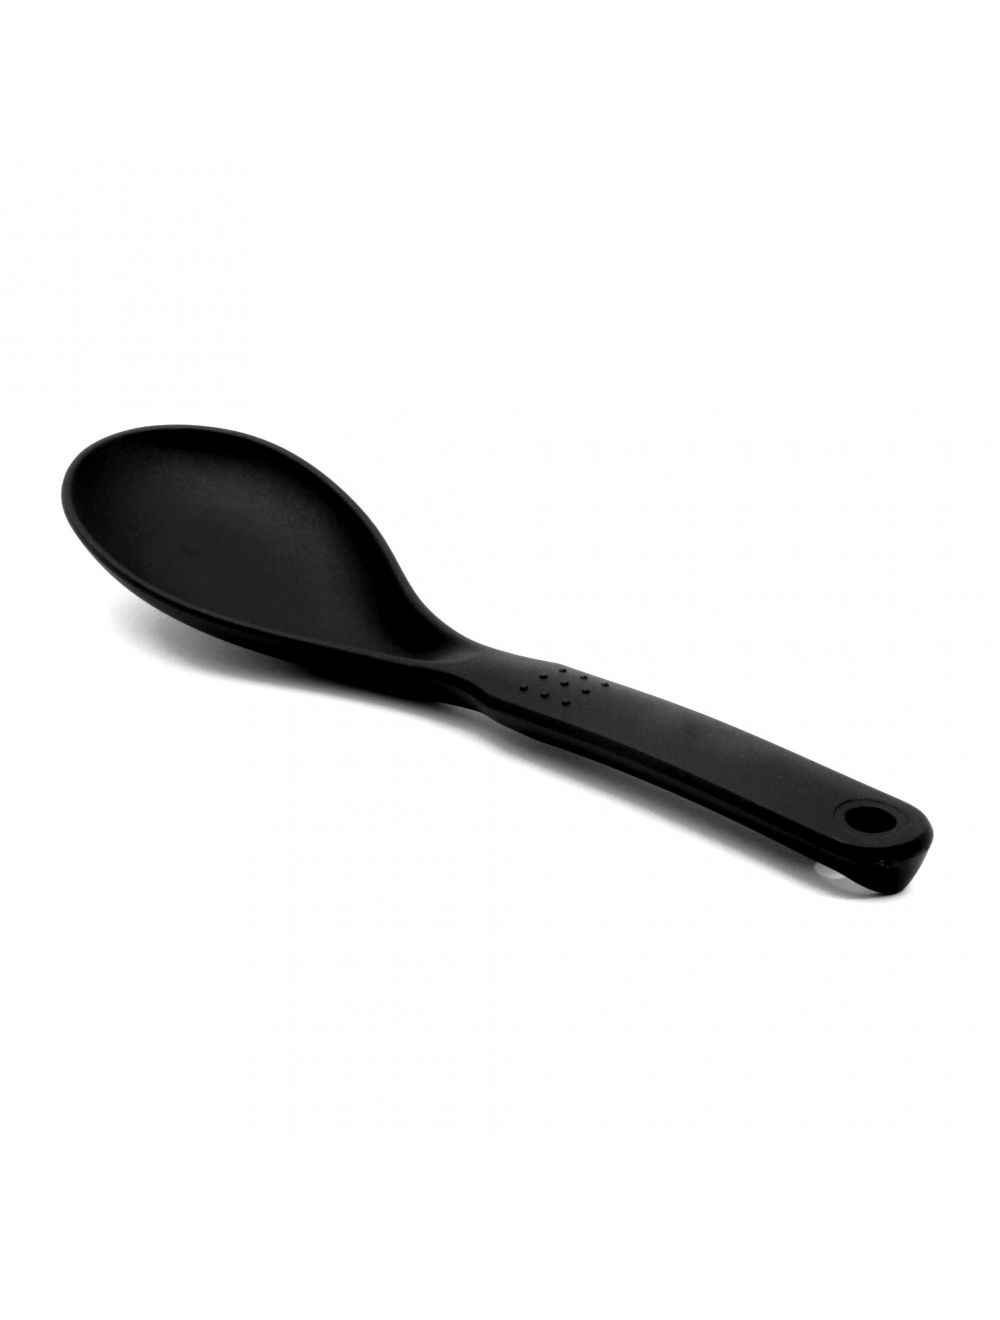 Royalford RF1201-NSVS Nylon Cooking and Serving Spoon with Soft Grip Handle